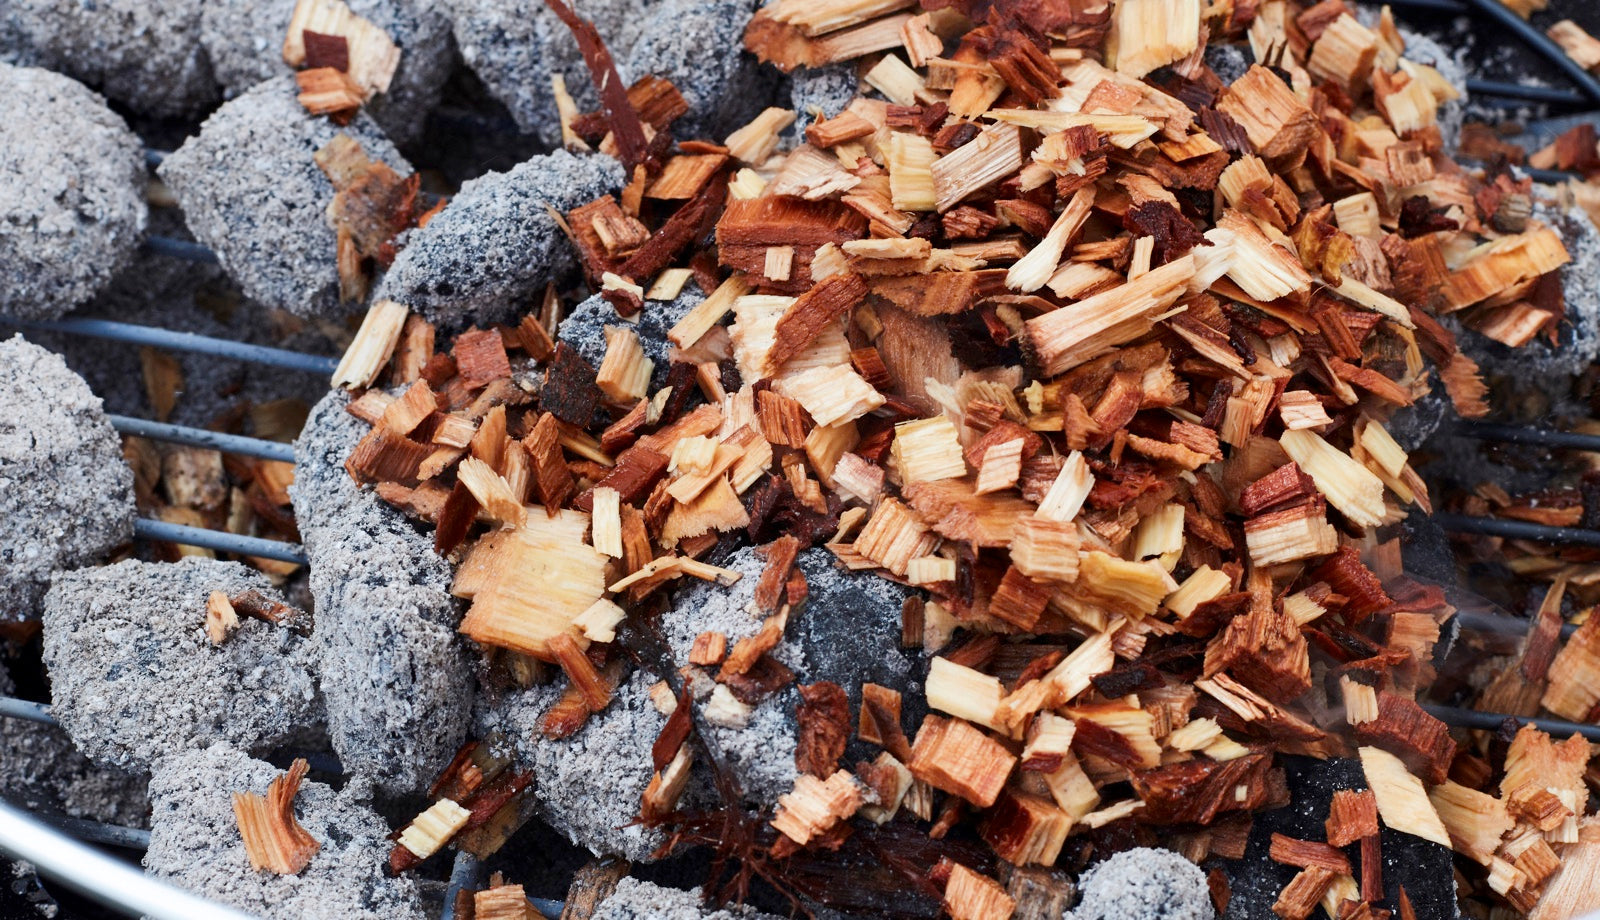 Which Type of Wood Should You Use for Smoking Meat?